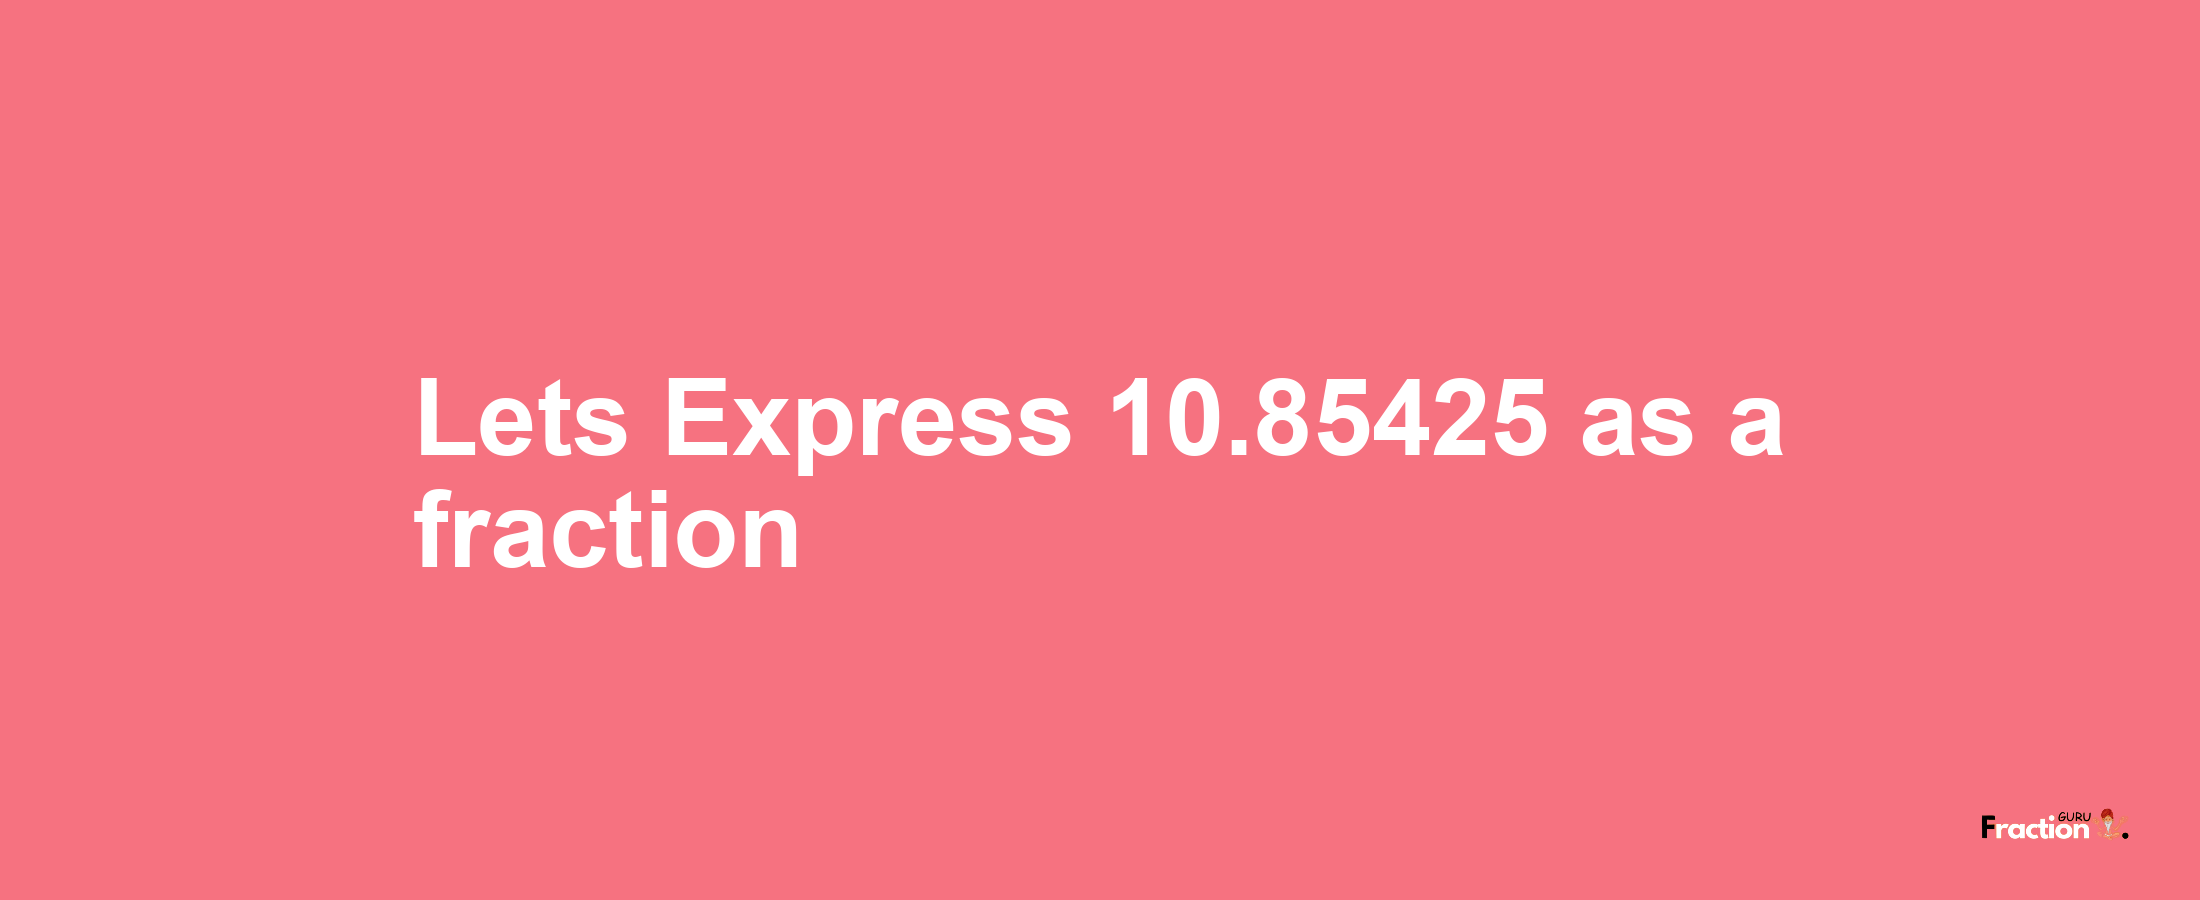 Lets Express 10.85425 as afraction